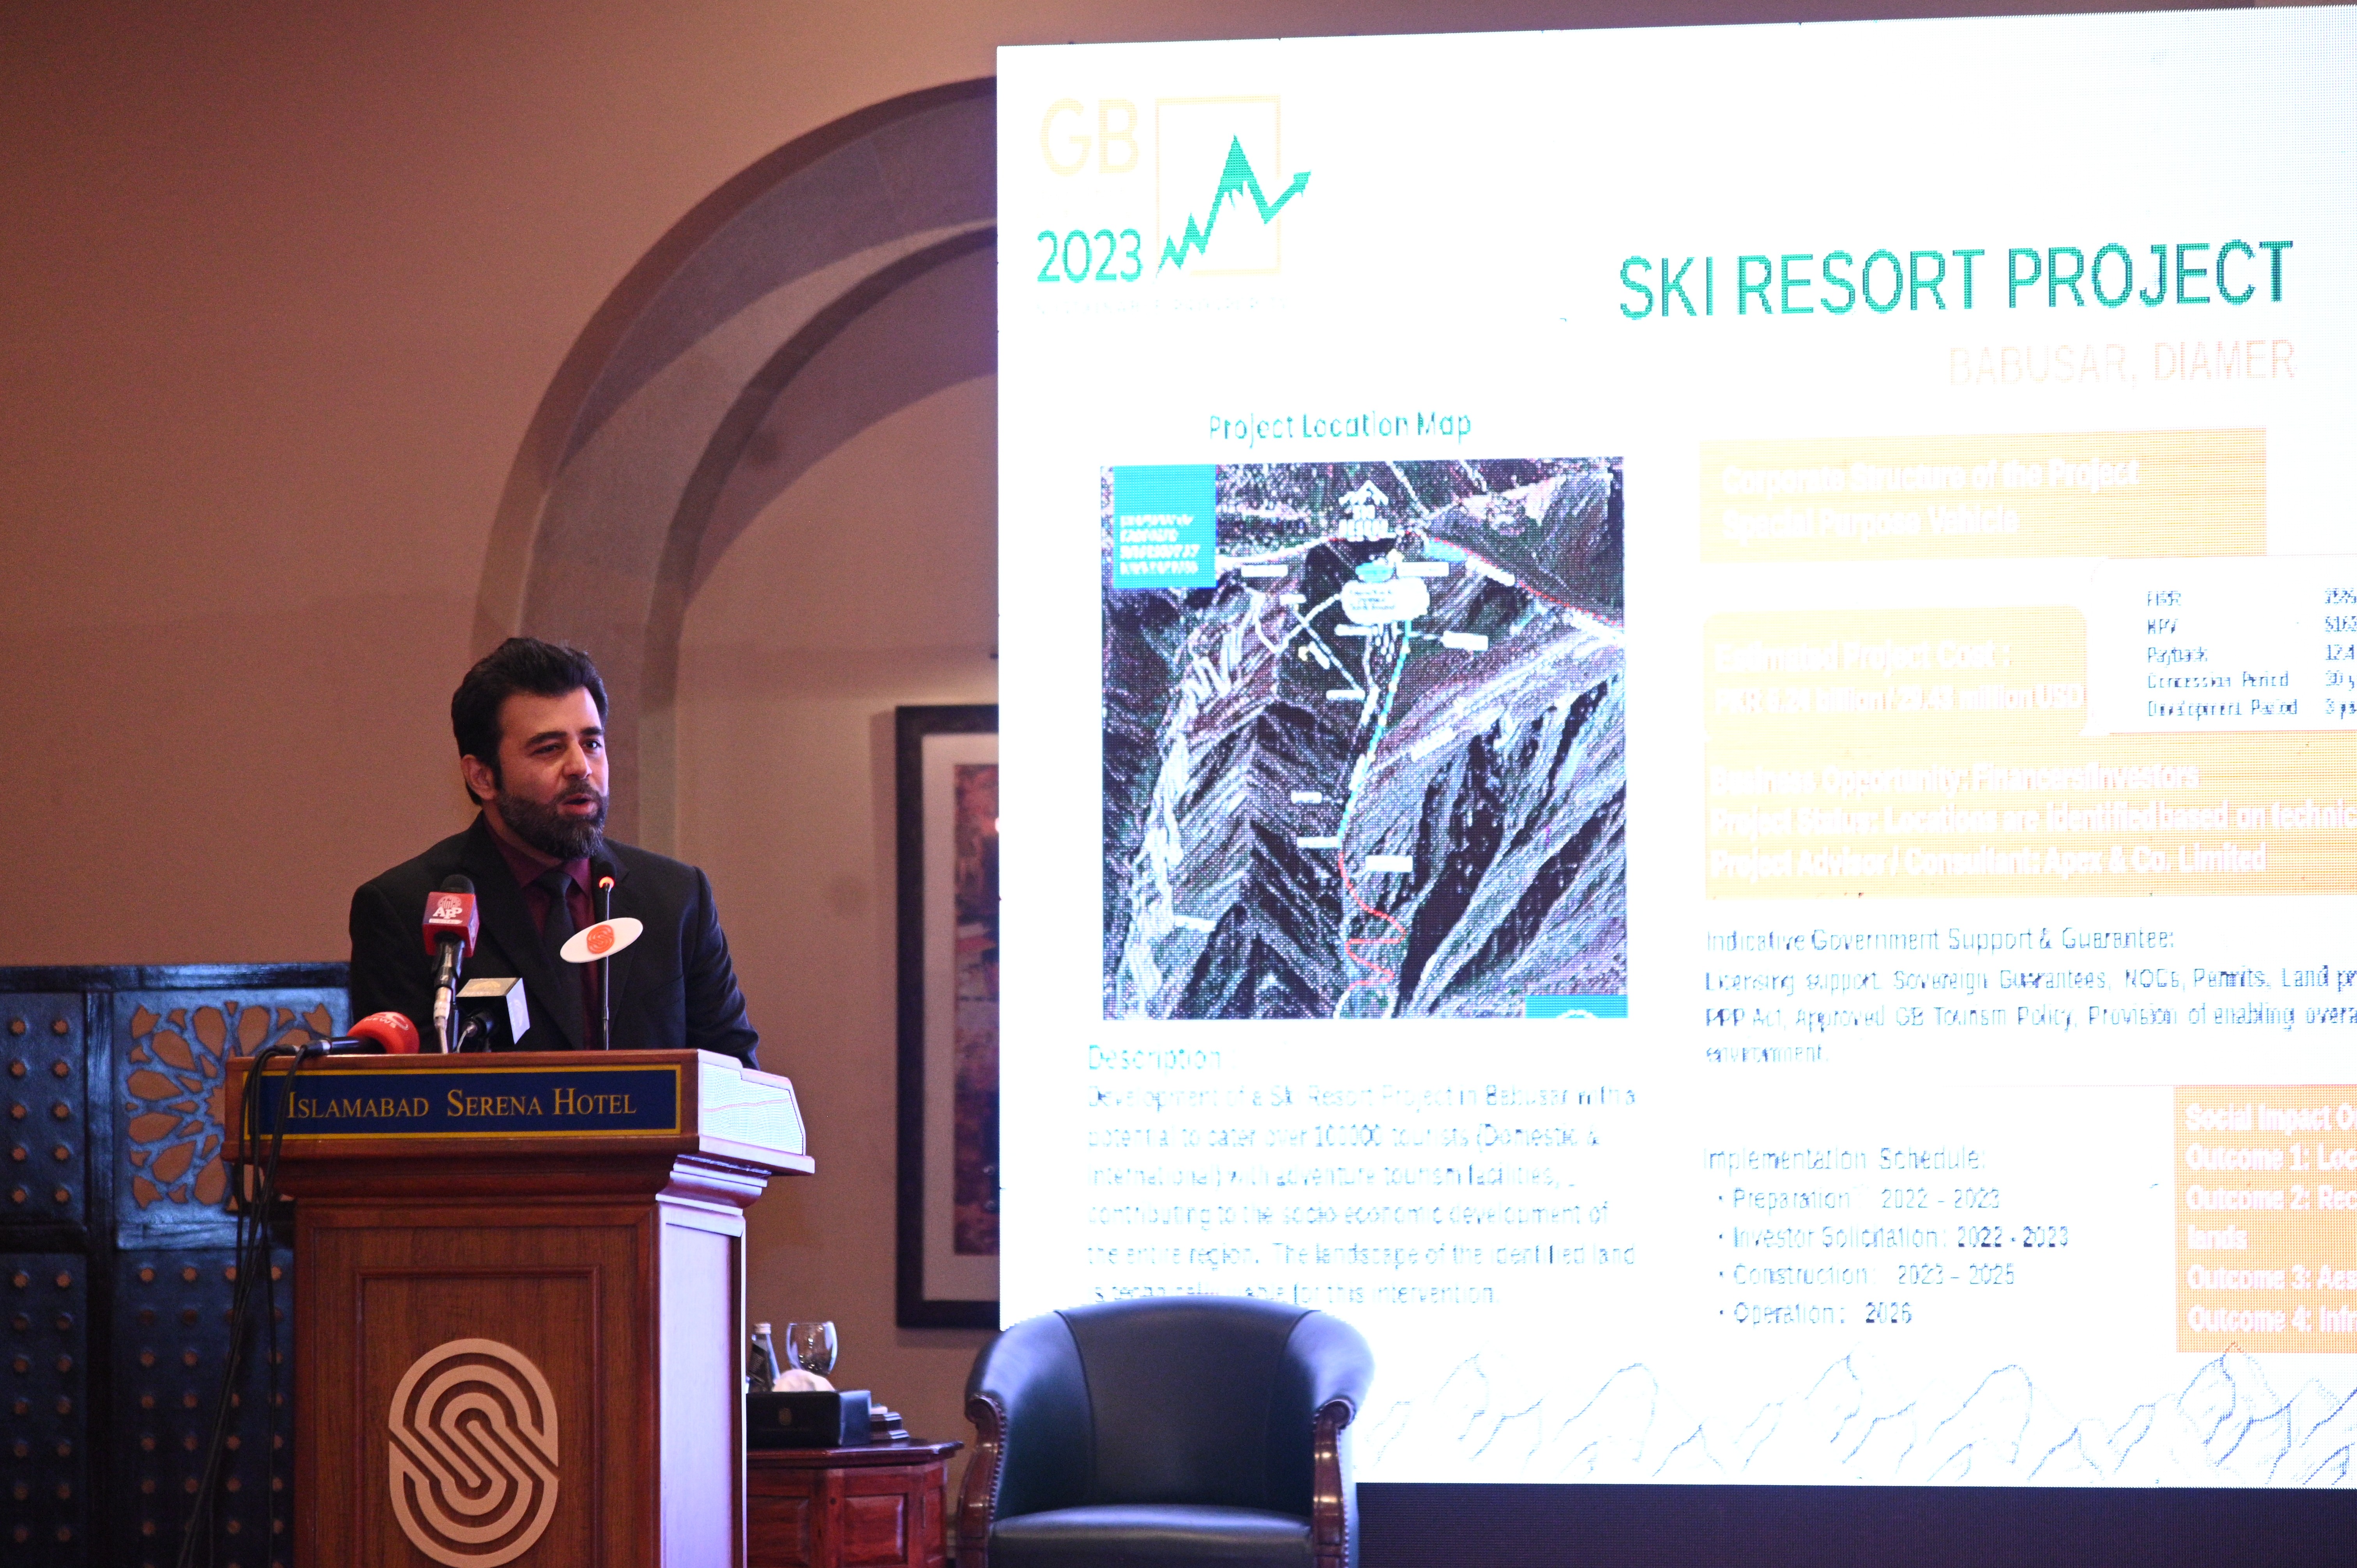 A presenter briefing about the SKI Resort Project which is to be initiated at Babusar